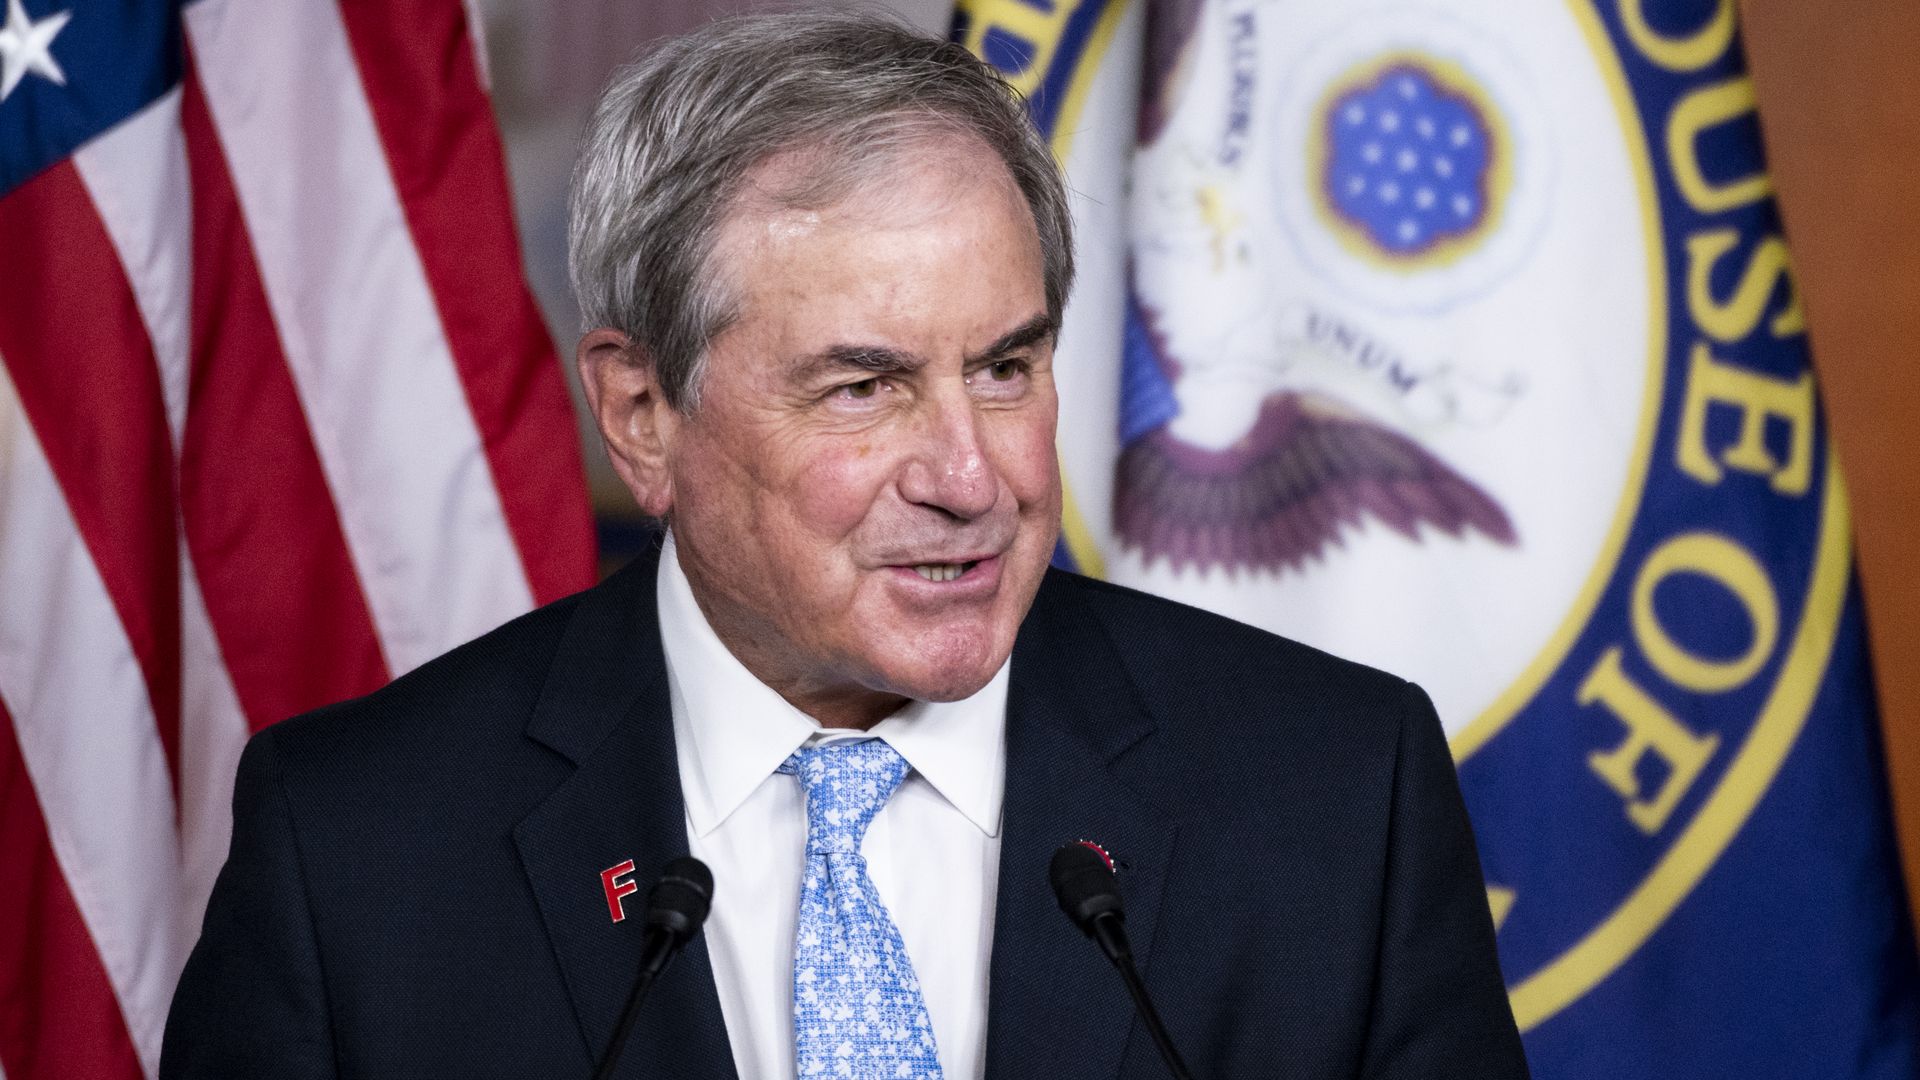 Rep. John Yarmuth, D-Ky., speaks during a news conference